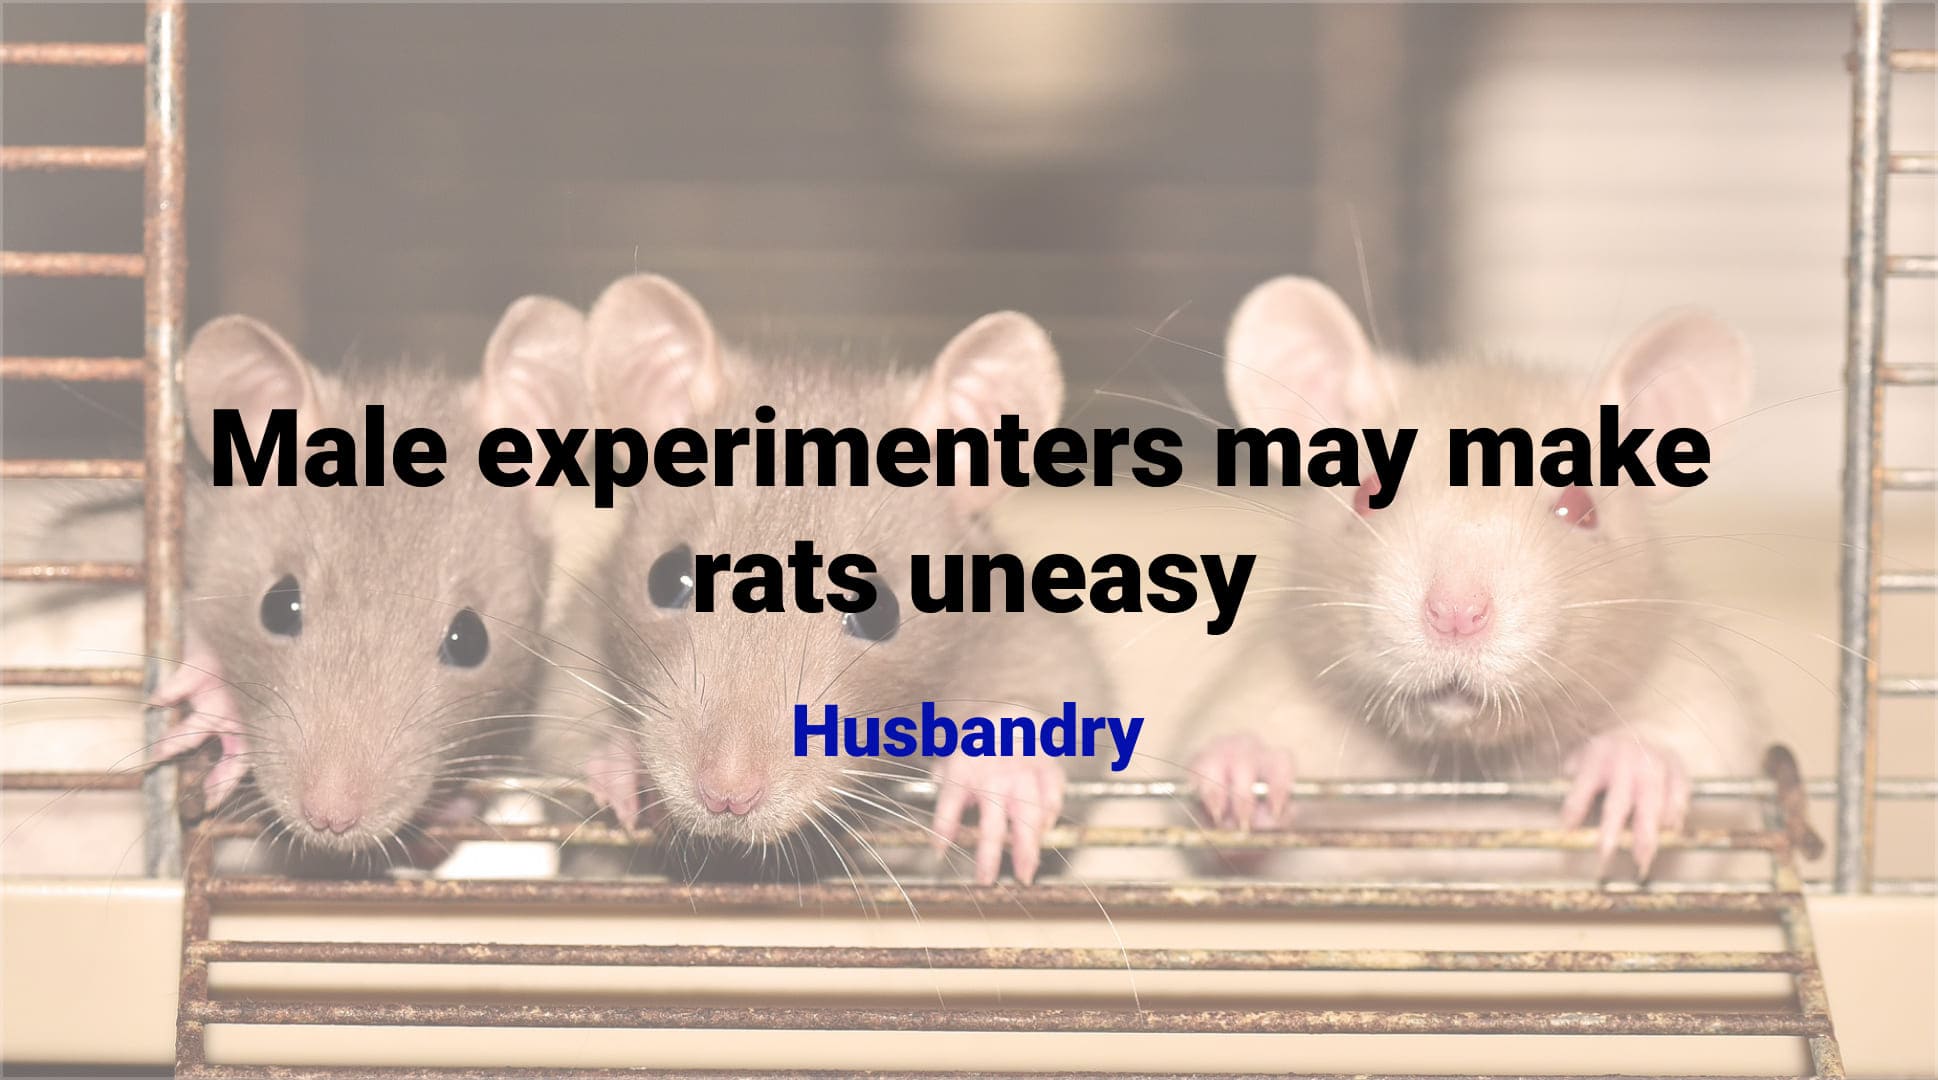 Male experimenters may make rats uneasy